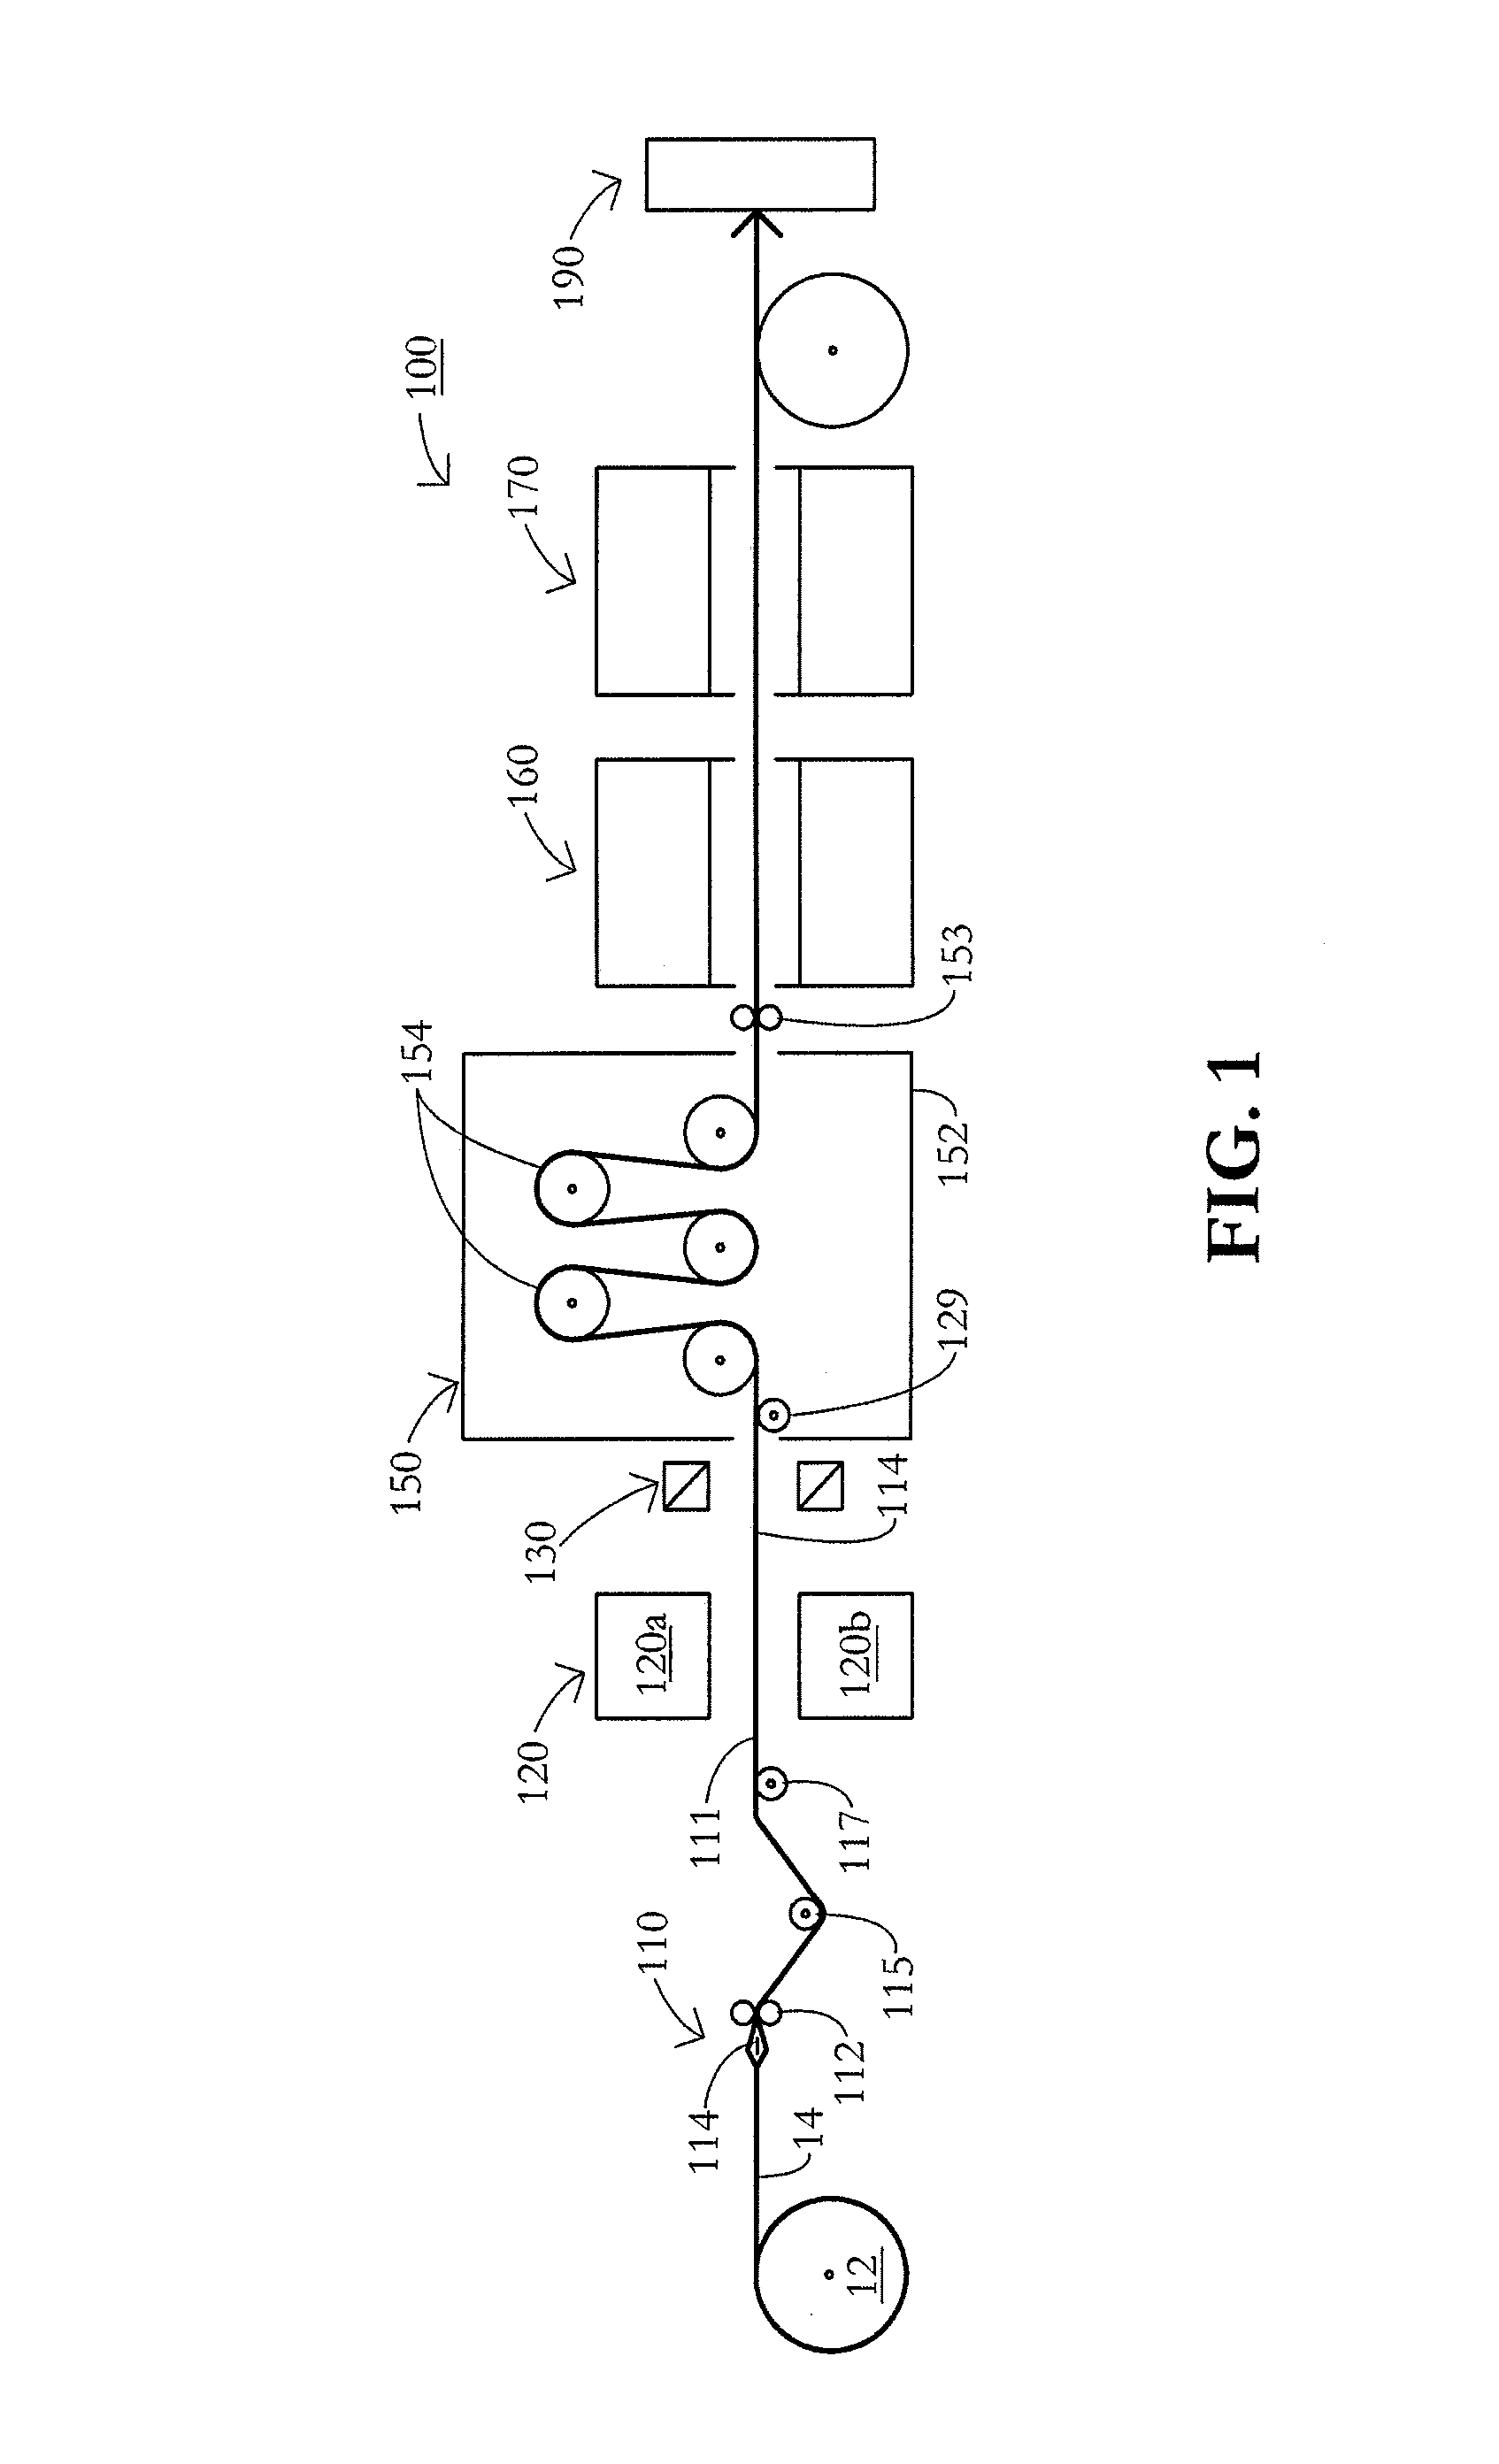 System and method for spray dyeing fabrics